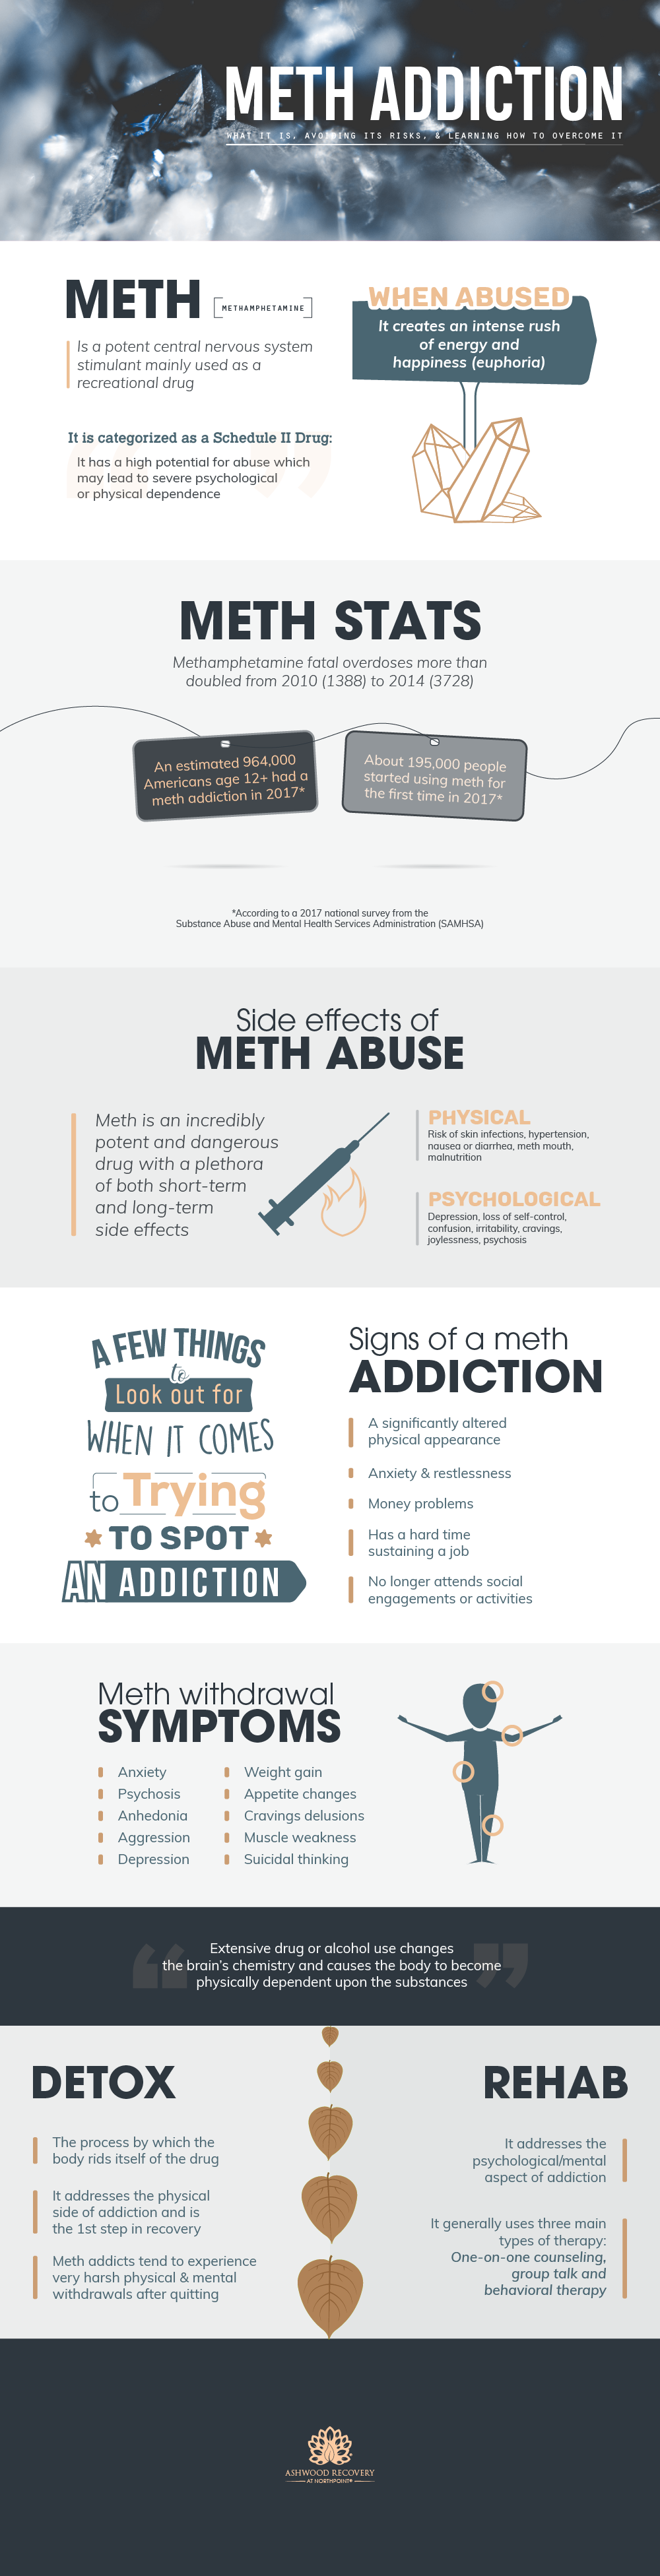 Meth addiction, what it is, avoiding its risk, and learning how to overcome it. Meth is a potent central nervous system stimulant mainly used as a recreational drug, when abused it creates an intense rush of energy and happiness (euphoria), meth is categorized as a schedule 2 drug, it has a high potential for abuse which may lead to severe psychological or physical dependence.According to a 2017 national survey from the Substance Abuse and Mental Health Services Administration (SAMHSA) methamphetamine fatal overdoses more than doubled from 2010 having 1388 to 2014 having 3728 in this year, an estimated 964000 americans age 12 or more had a meth addiction in 2017, about 195000 people started using meth for the first time in 2017. Meth is an incredibly potent and dangerous drug with a plethora of both short term and long term side effects. Physical side effects of meth abuse are physical and psychological, physical side effects includes risk of skin infrections, hypertension, nausea or diarrhea, meth, mouth and malnutrition, pyschological side effects are depression, loss of self control, confusion, irritability, cravings, joylessness and psychosis. Sign of a meth addiction includes a significantly altered physical appearance, anxiety and restlessness, money problems, have a hardtime sustaining a job and no longer attending social engagements or activities. Meth withdrawal symptoms includes anxiety, psychosis, anhedonia, aggression, depression, weight gain, appetite changes, cravings delusions, muscle weakness and suicidal thinking. Detox is the process by which the body rids itself of the drug, detox addresses the physical side of addiction and is the first step in recovery, meth addicts tend to experience very harsh physical and mental withdrawals after quitting. Rehab addresses the psychological/mental aspect of addiction, rehab generally uses three main types of therapy one on one counseling, group talk and behavioral therapy. Extensive drug or alcohol use changes the chemistry of the brain and causes the body to become physically dependent upon the substances